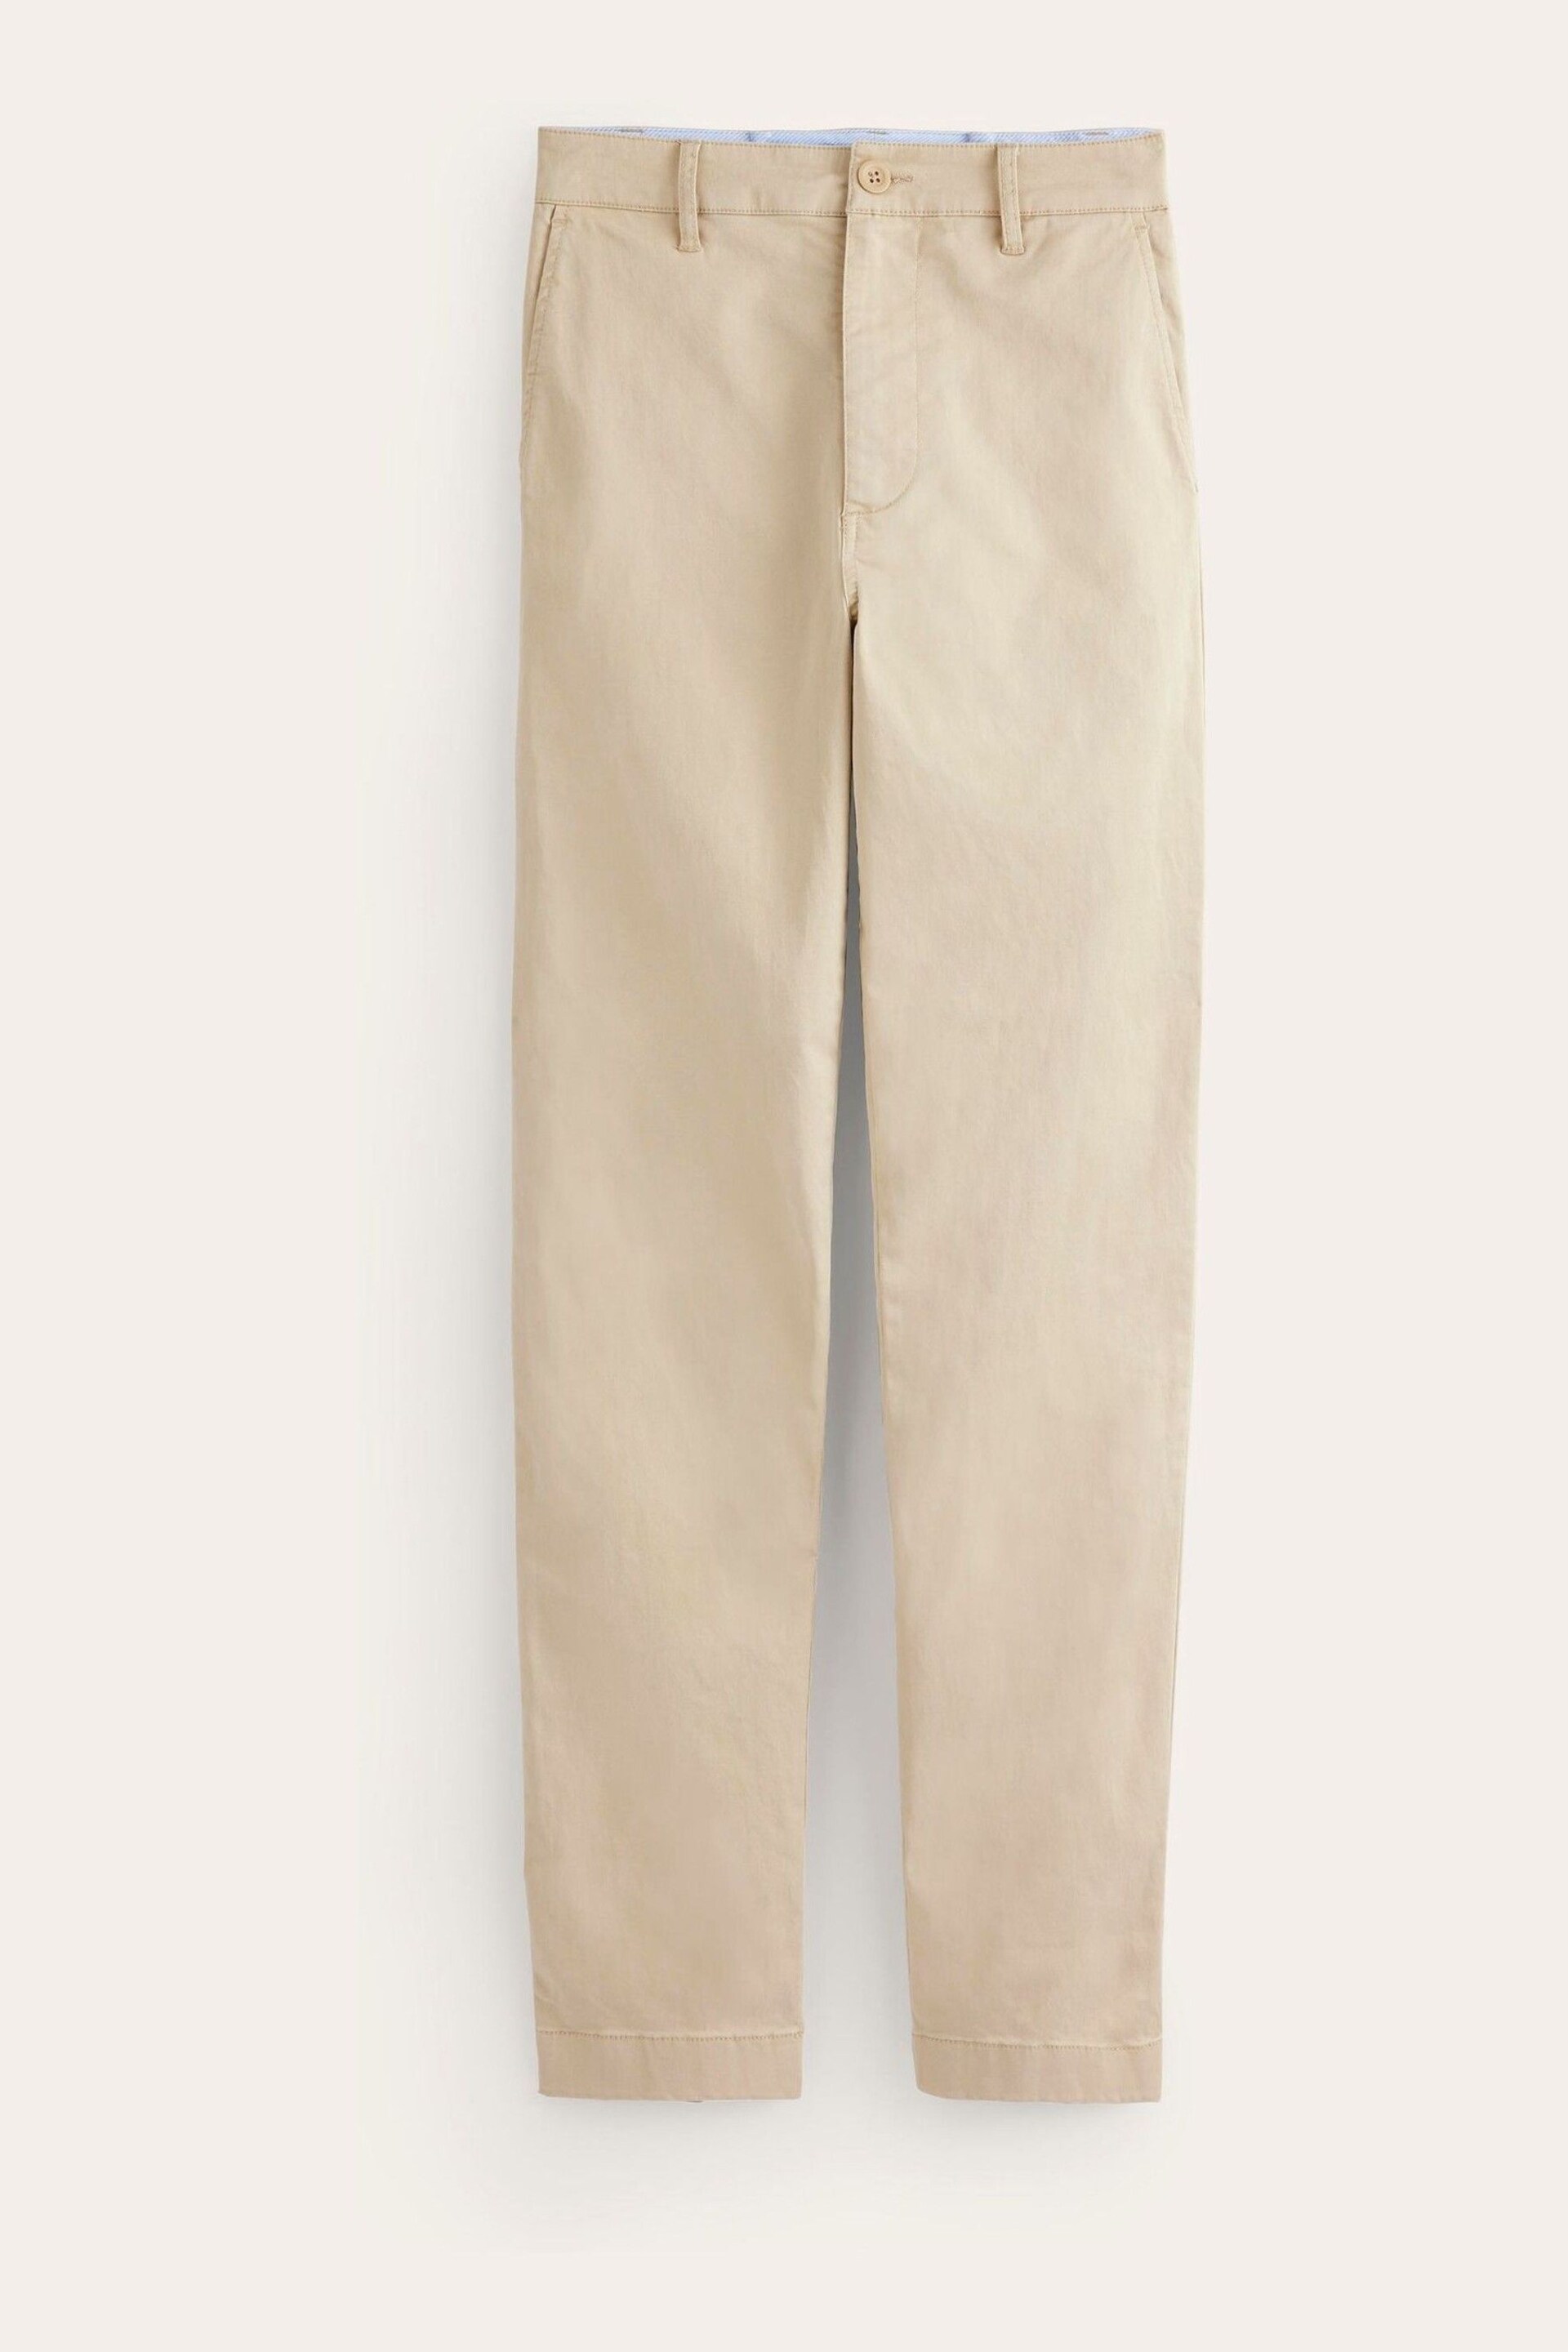 Boden Natural Barnsbury Chino Trousers - Image 5 of 5